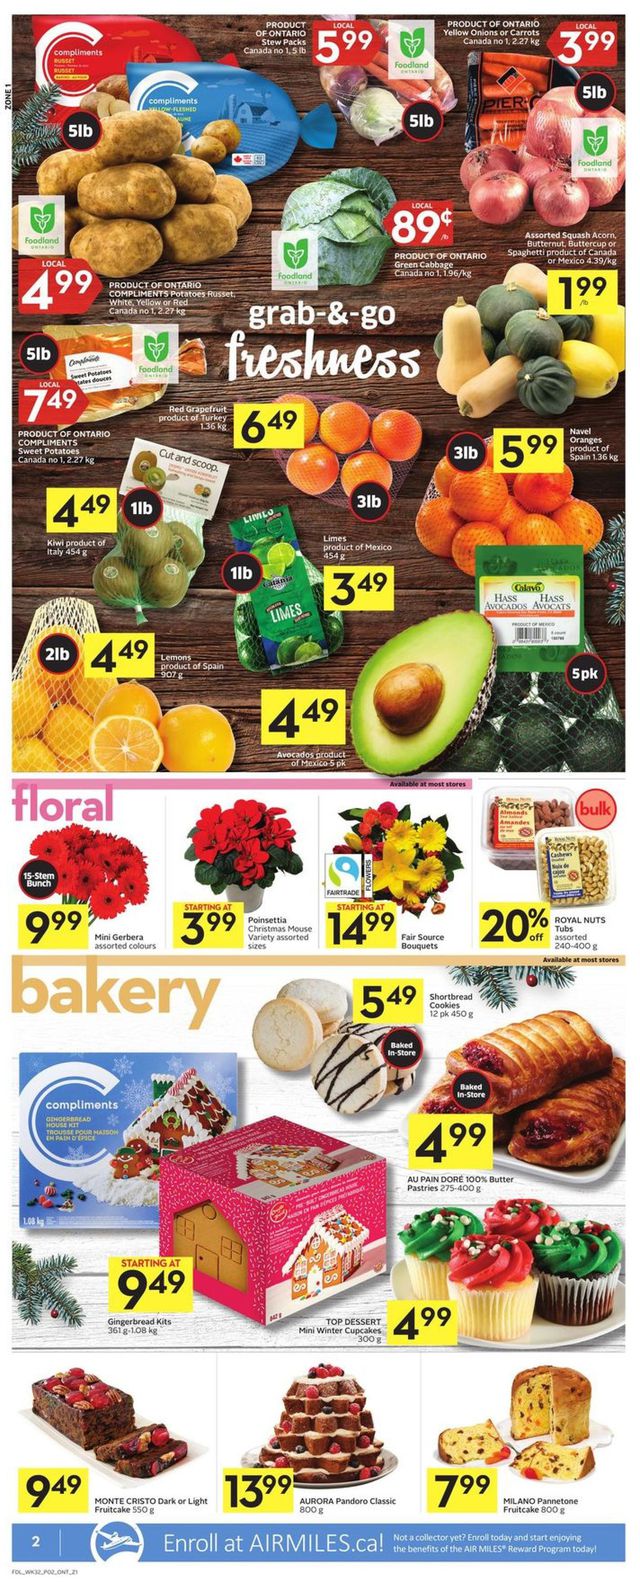 Foodland Flyer from 12/02/2021